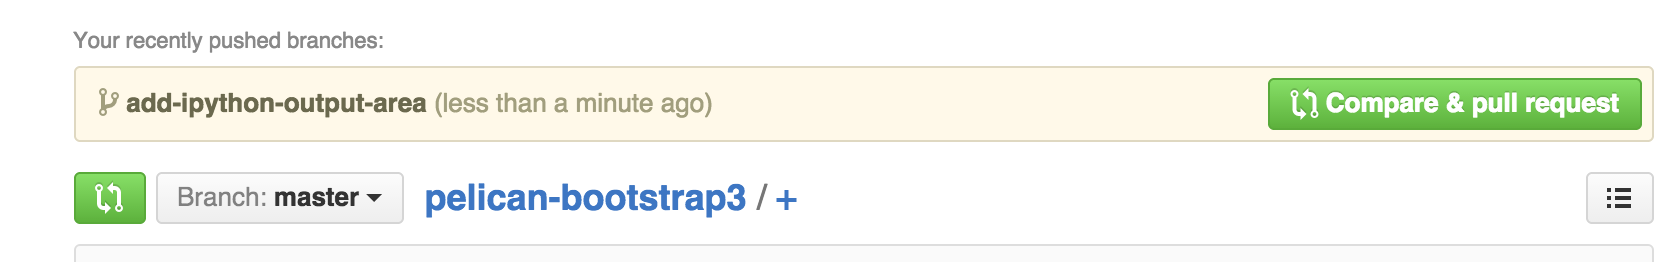 Screenshot of github showing pull request button